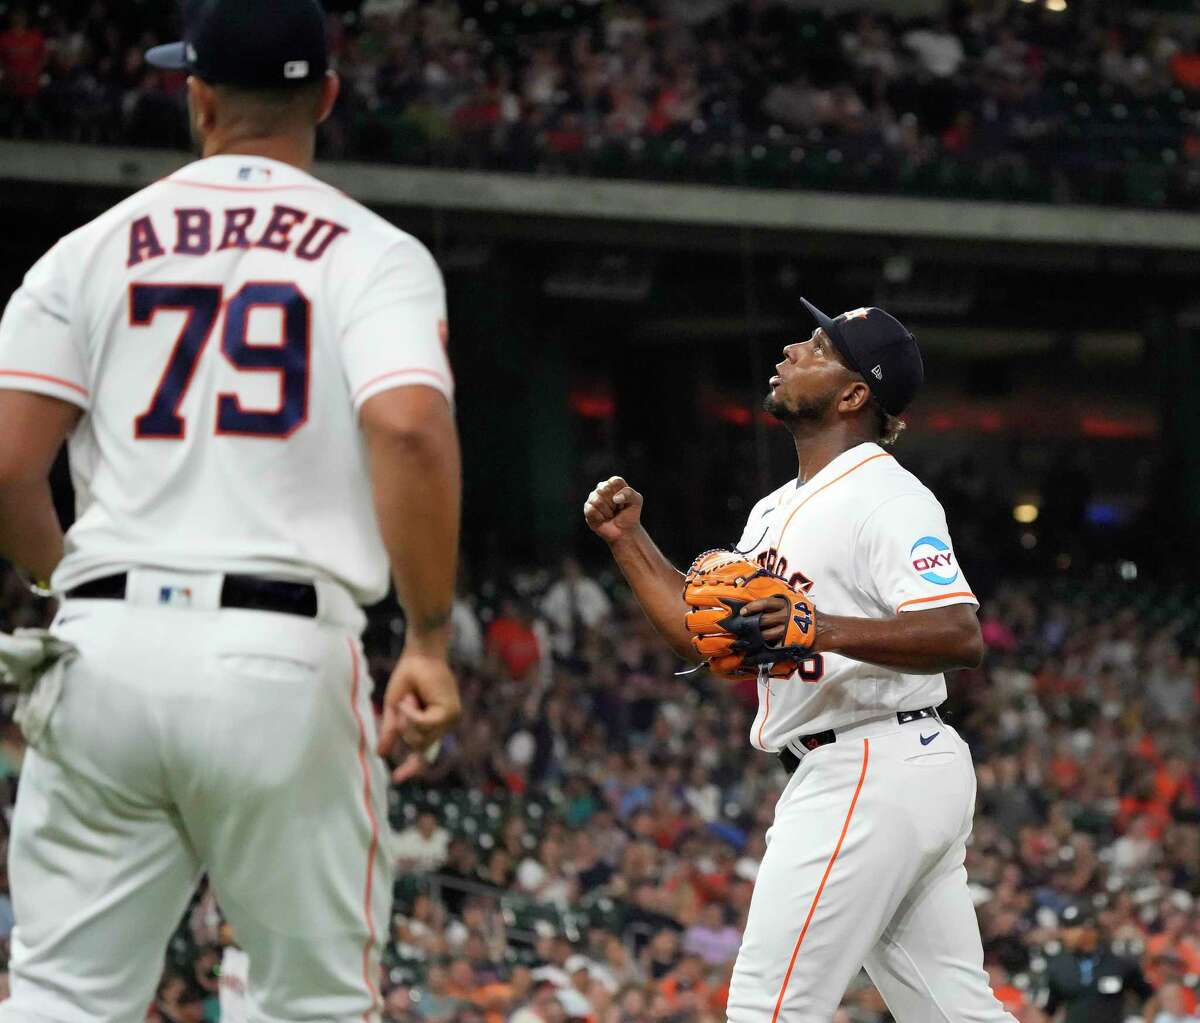 Astros: Concerning stats show Houston rotation could be in trouble